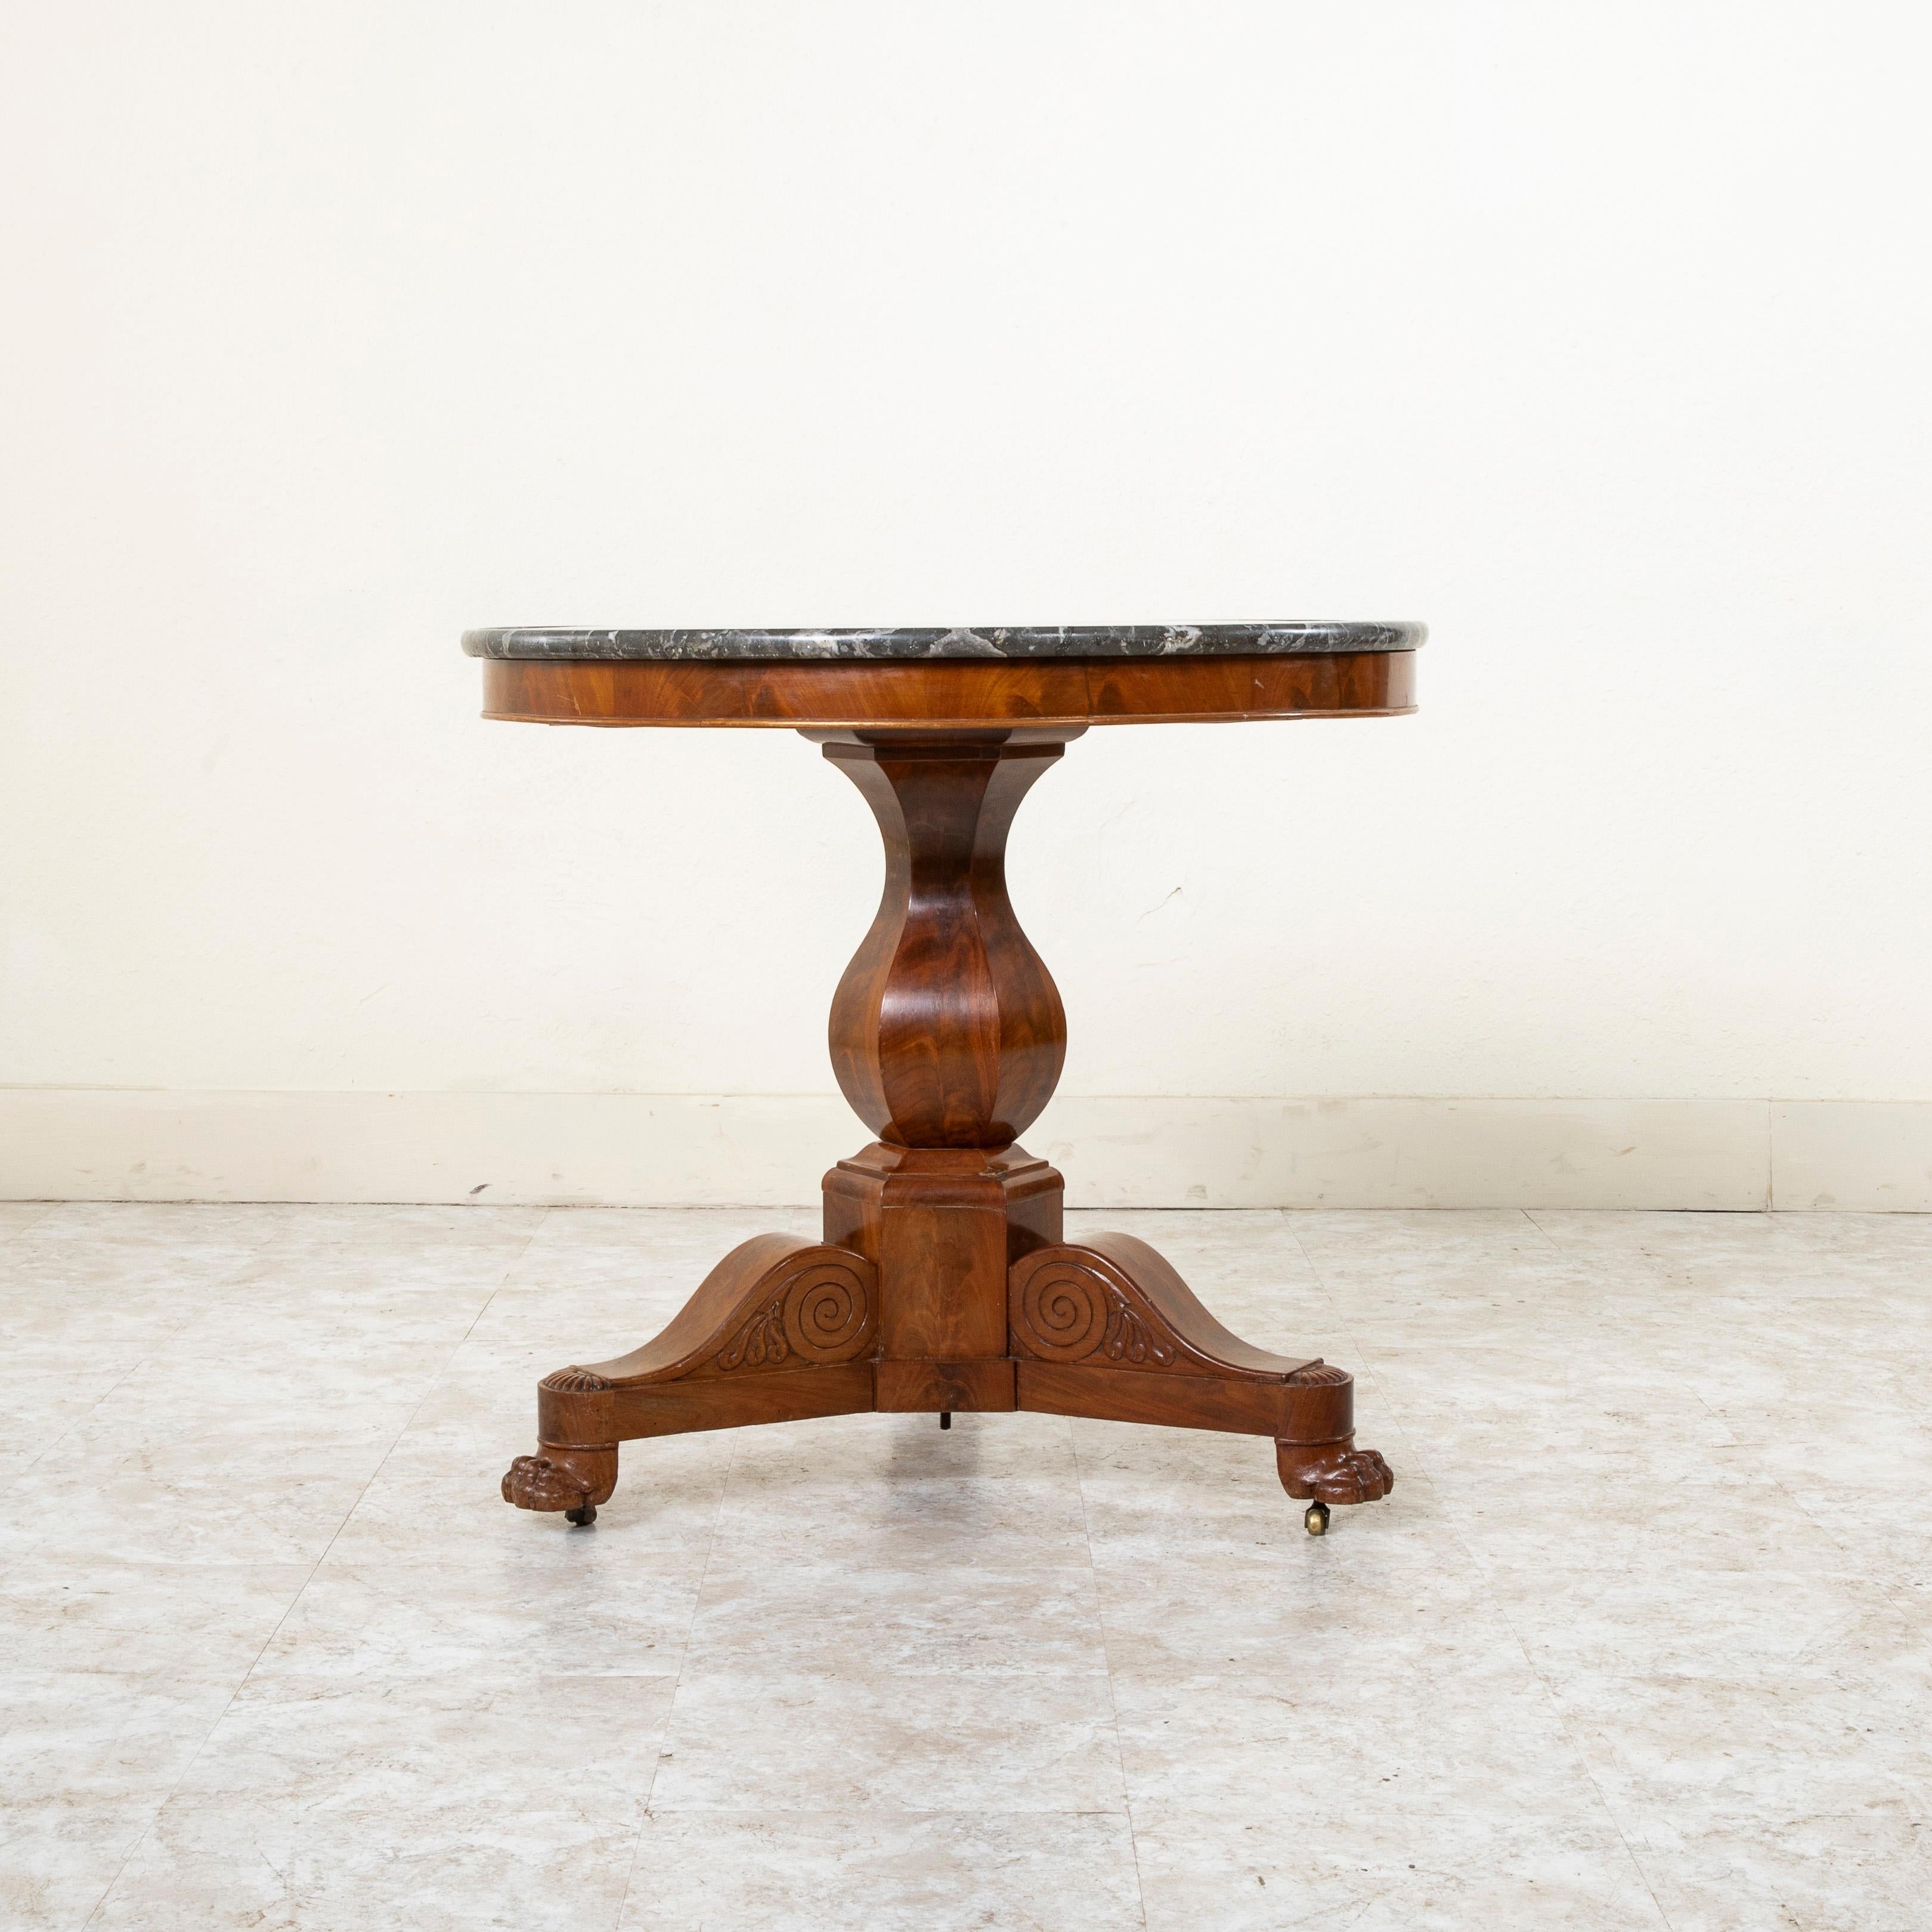 Mid-19th Century French Restauration Period Mahogany and Marble Pedestal Table In Good Condition For Sale In Fayetteville, AR